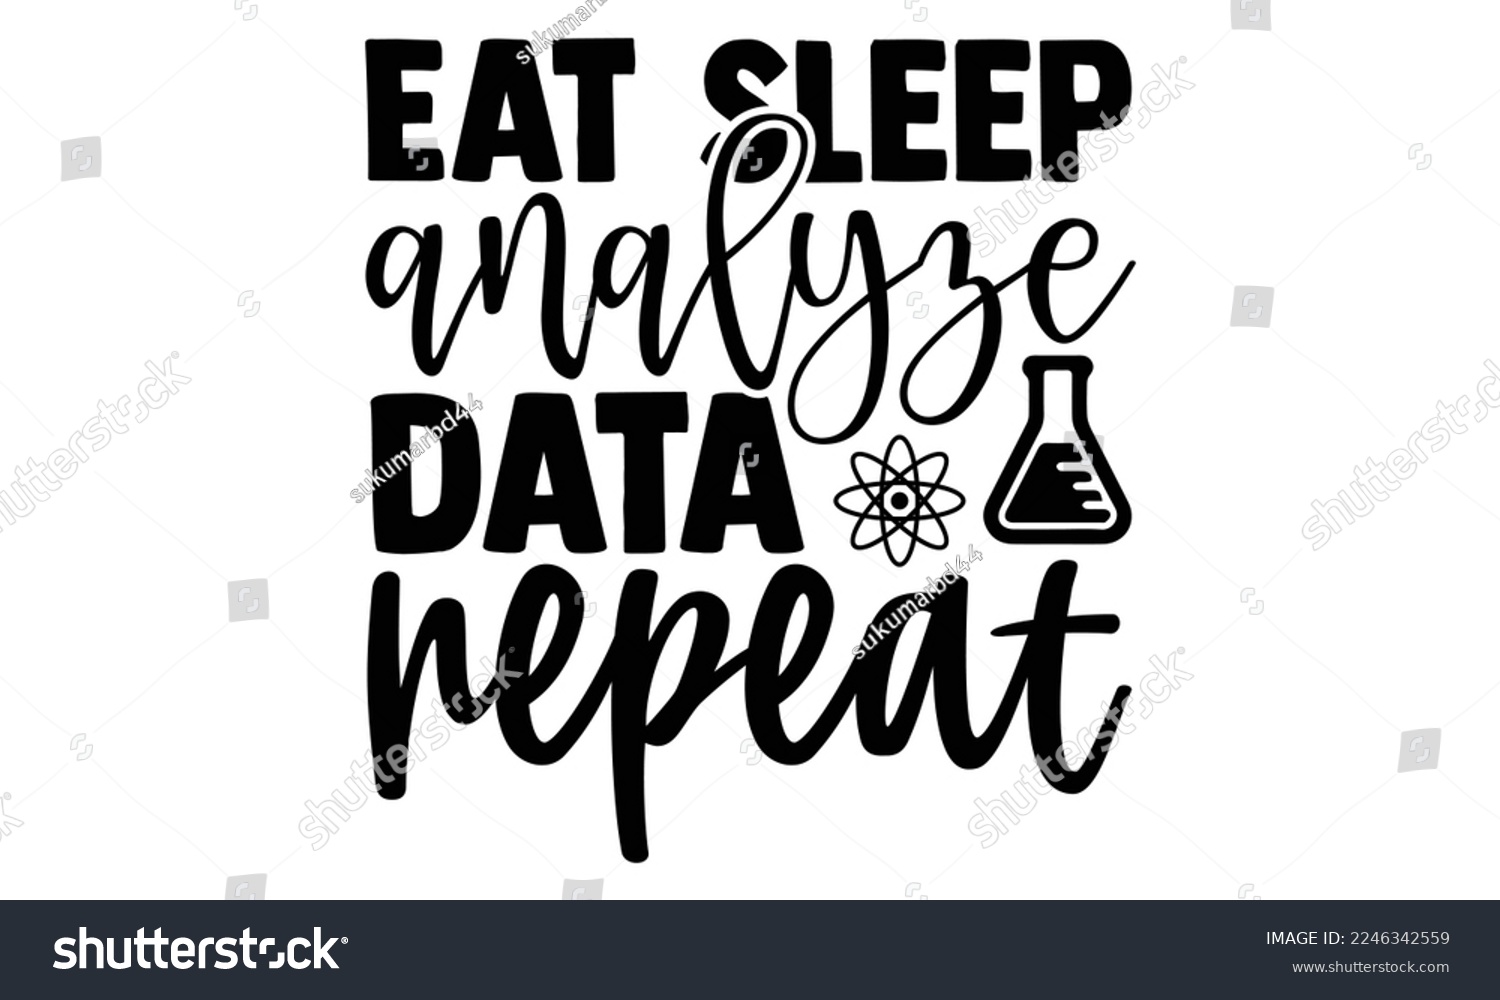 SVG of Eat Sleep Analyze Data Repeat - Scientist t shirt design, Hand drawn lettering phrase, svg Files for Cutting Cricut and Silhouette, Handmade calligraphy vector illustration svg